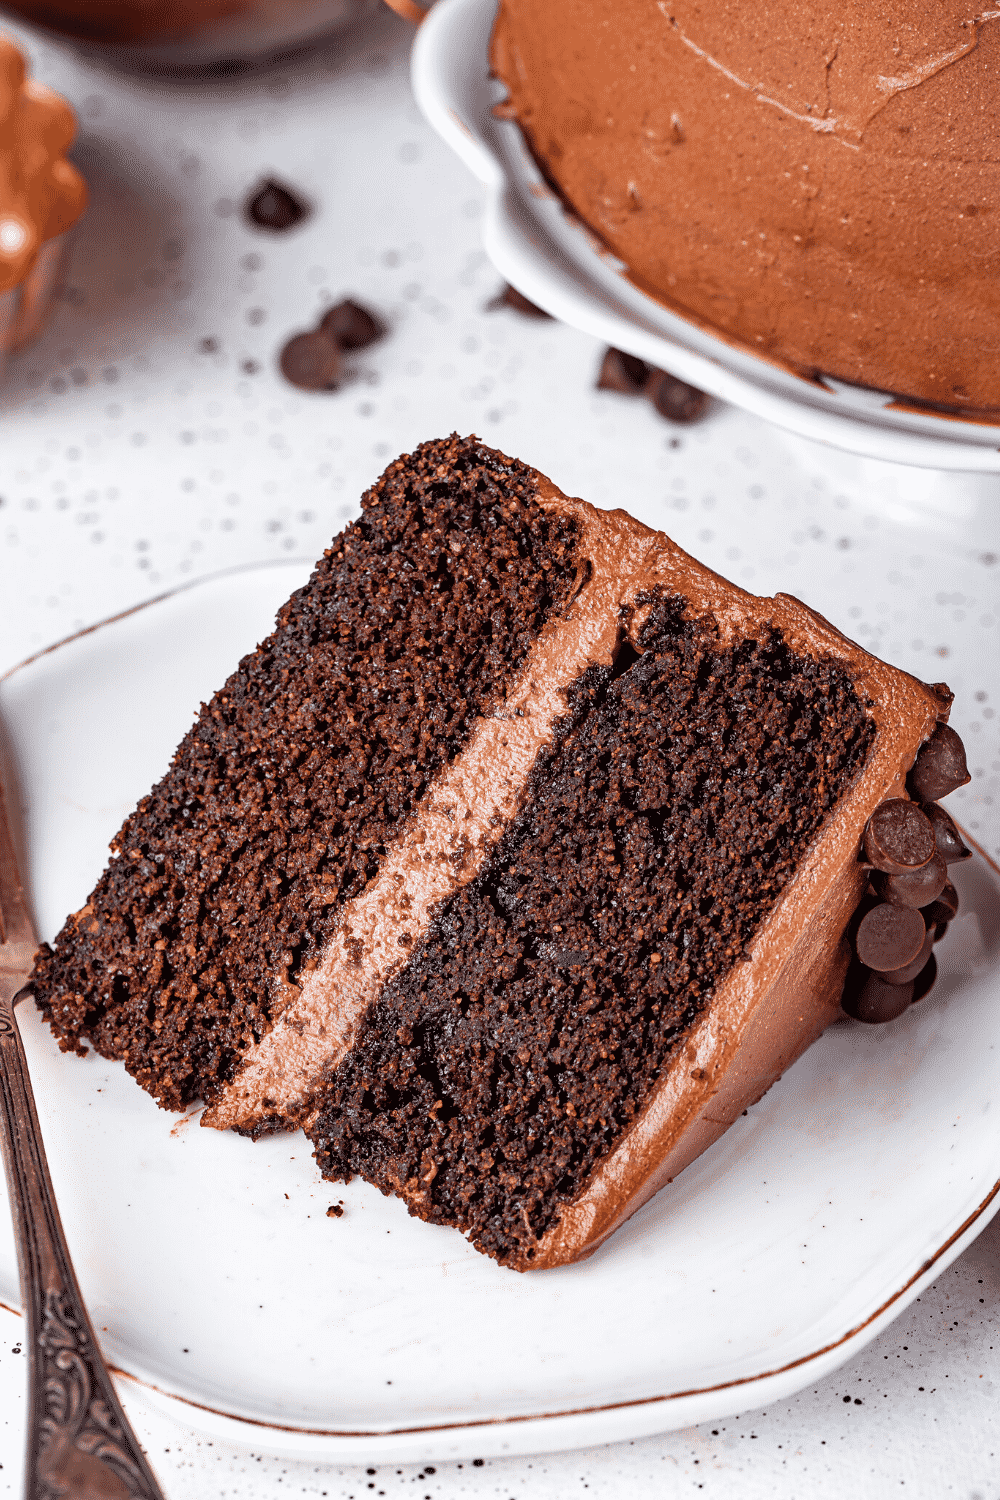 A slice of chocolate cake lying on its side on a white plate.